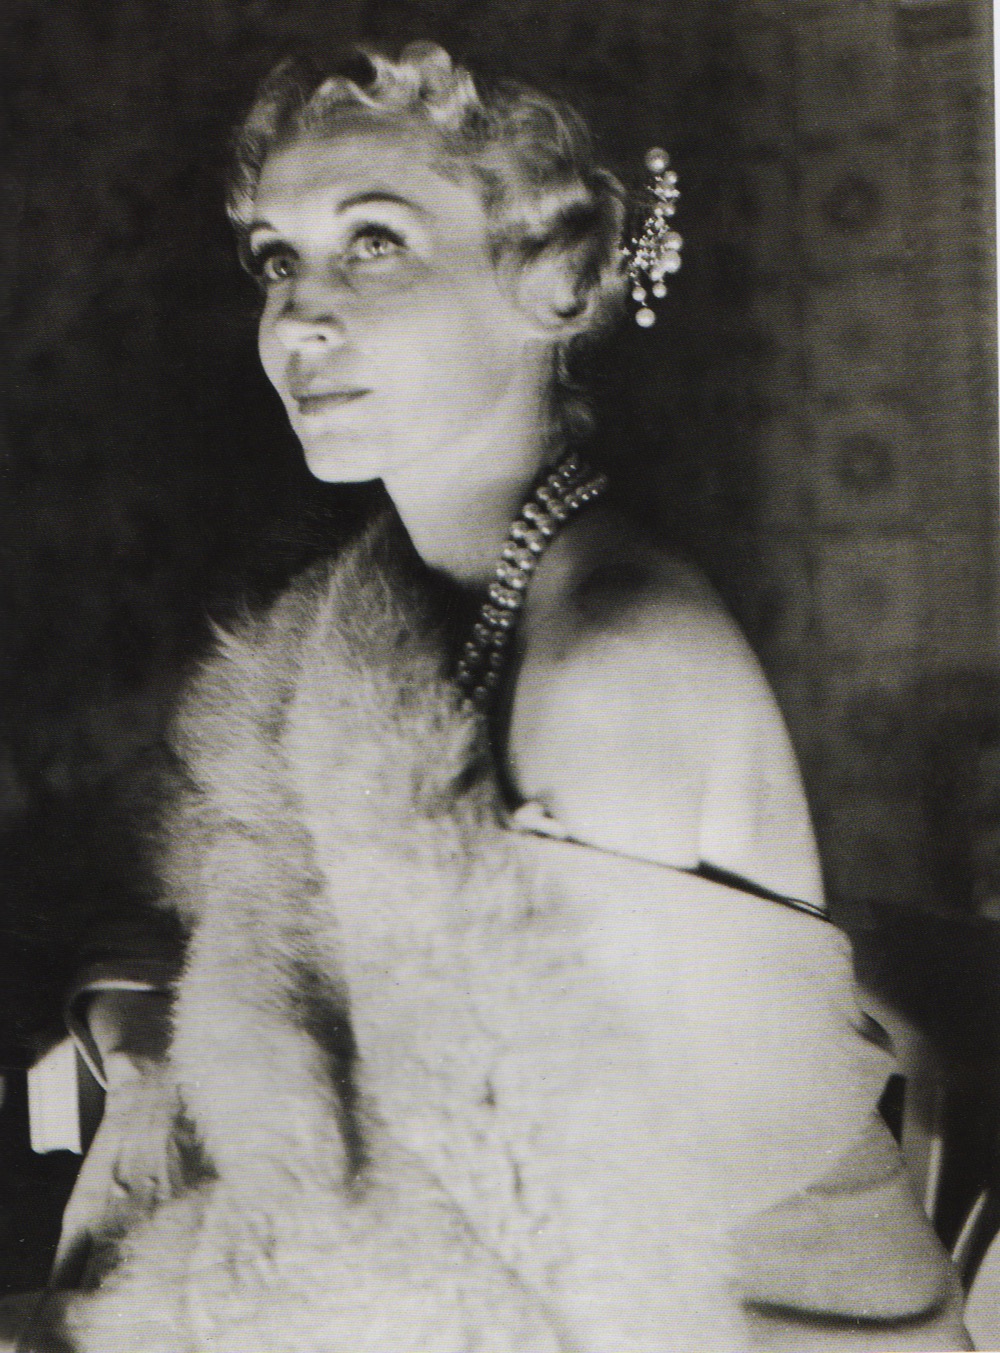 Pearls and a hair clip. 1930s photograph